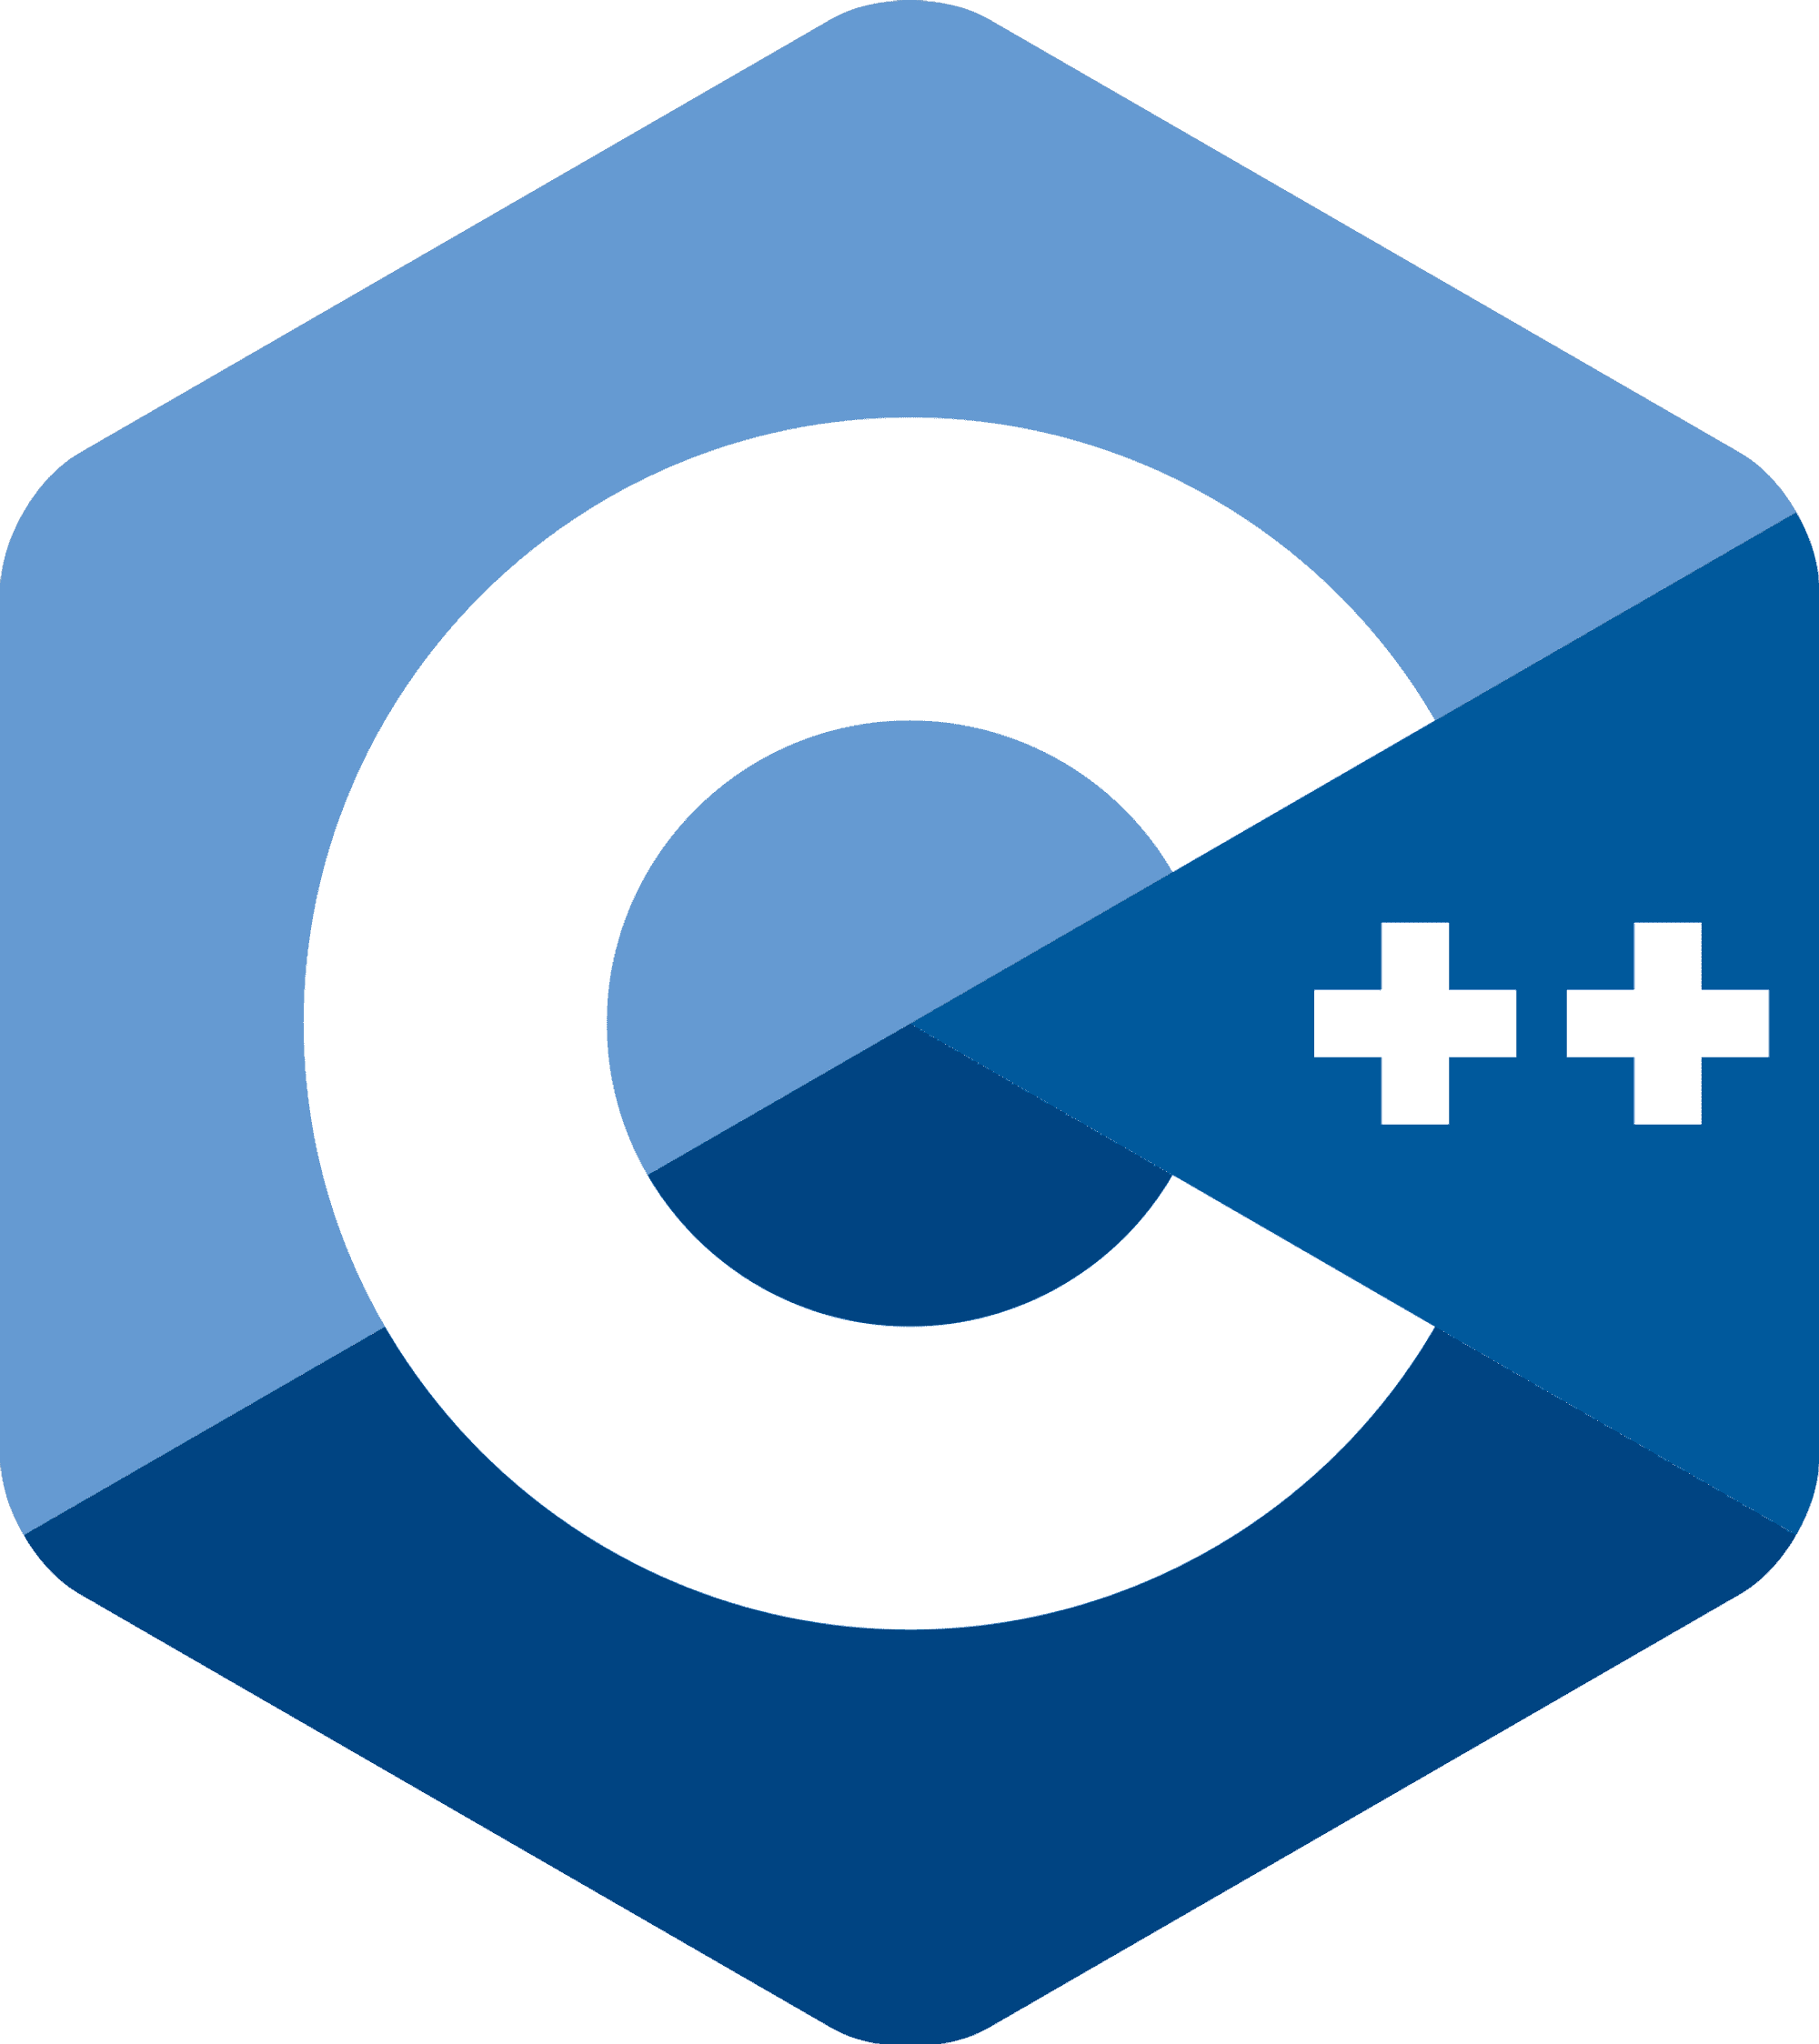 C++
CMake 3.15 + 
C++ 14 or higher